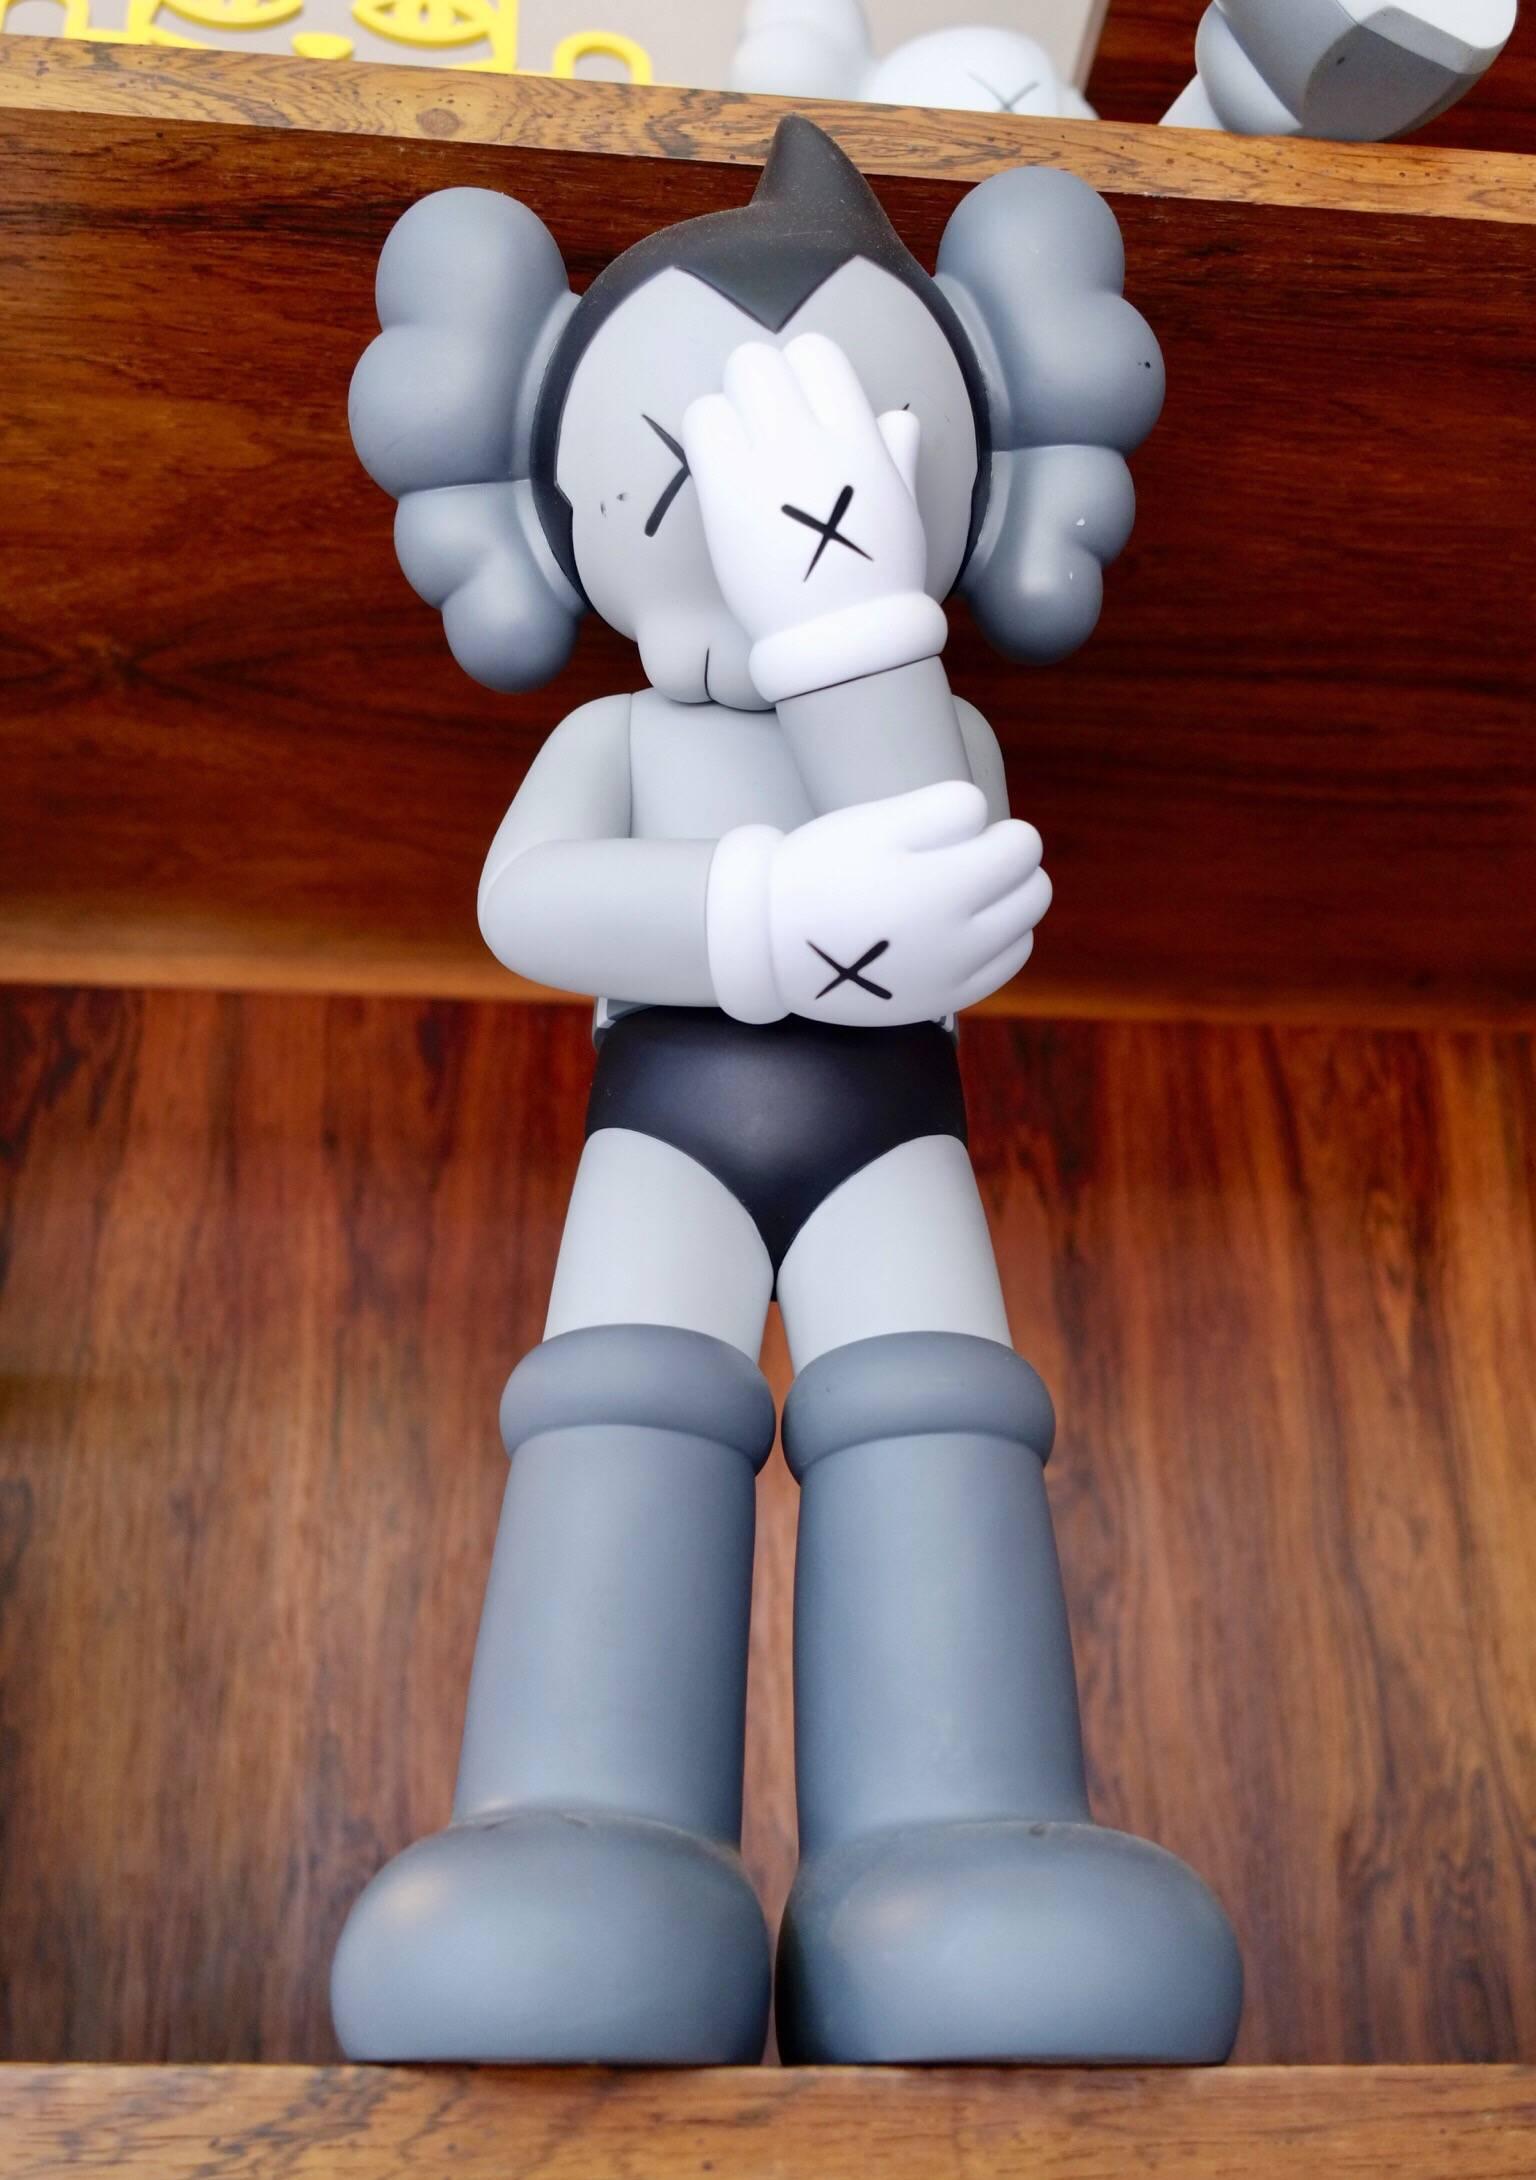 Kwas, astro boy companion, 2012.
Tezuka productions.

Black, white and two different greys.
Painted cast vinyl.
From an edition of 1000.
In its original packaging / box. 
Produced and manufactured Medicom Toy Corporation, China.

About the